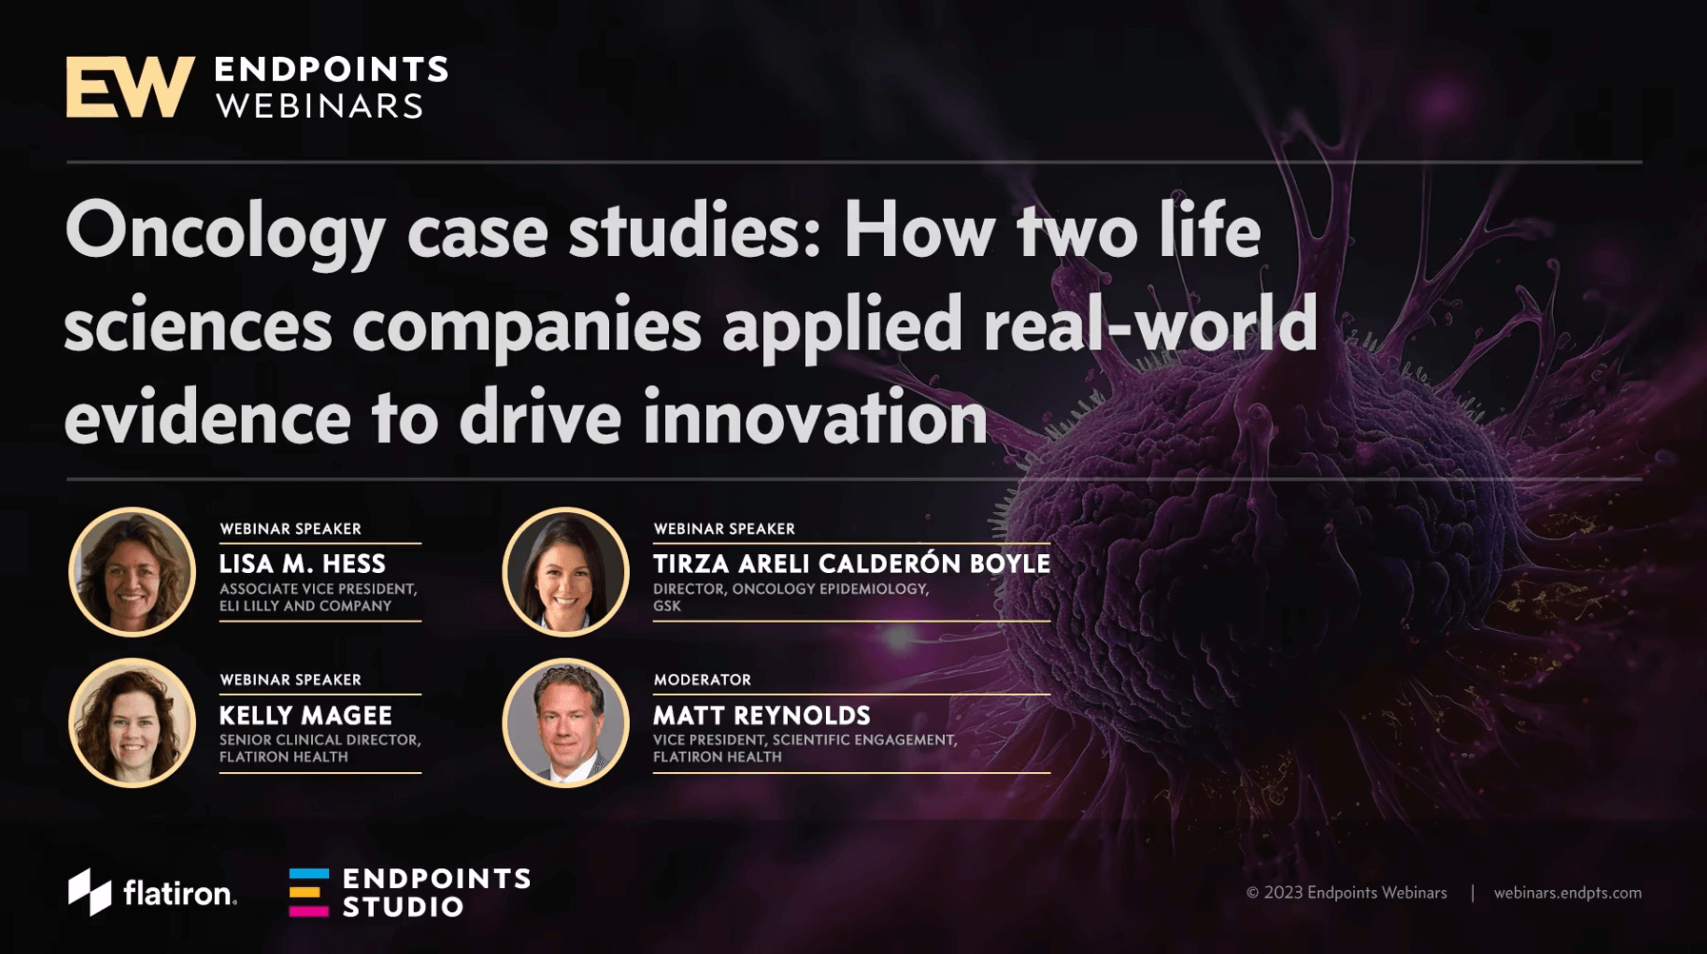 Oncology case studies: How two life sciences companies applied real-world evidence to drive innovation